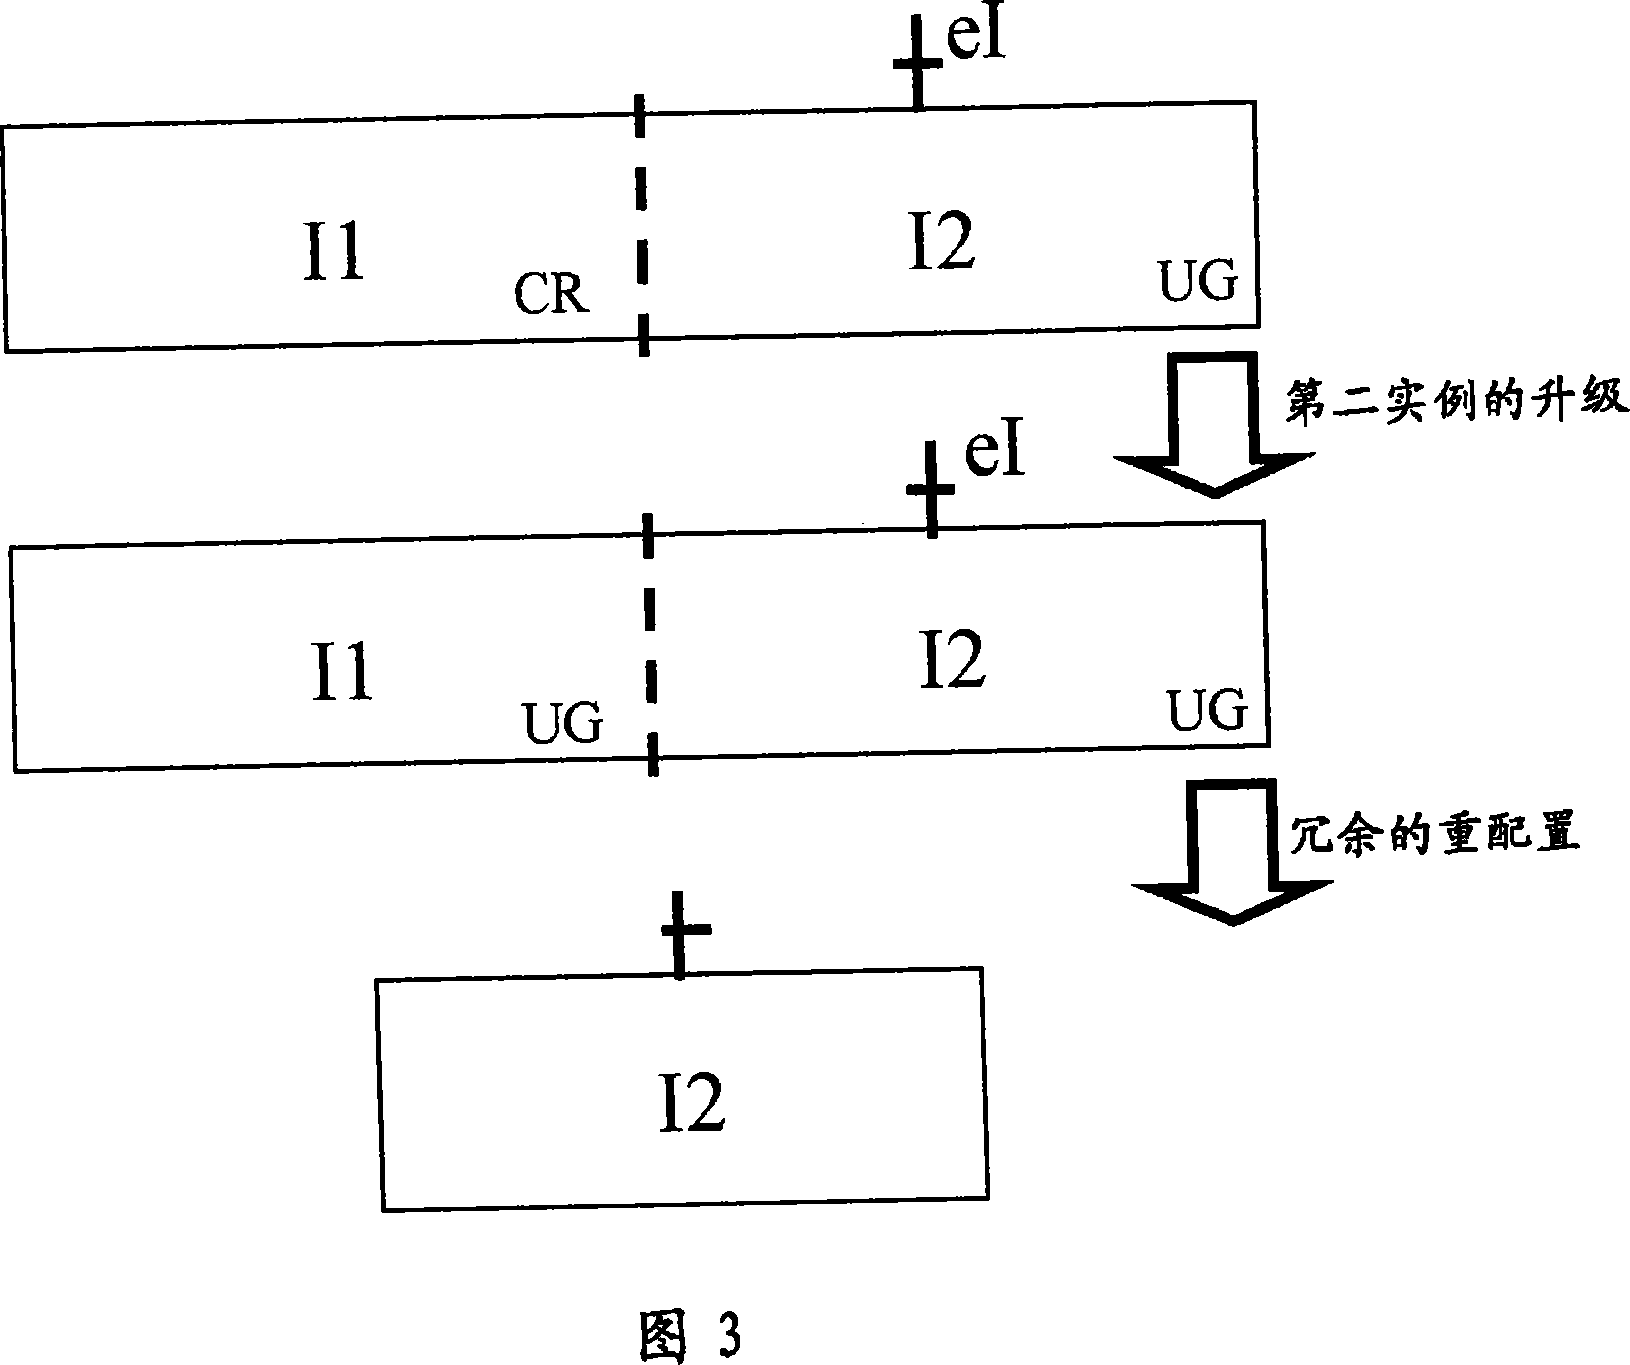 Software replacement in a stream processing system